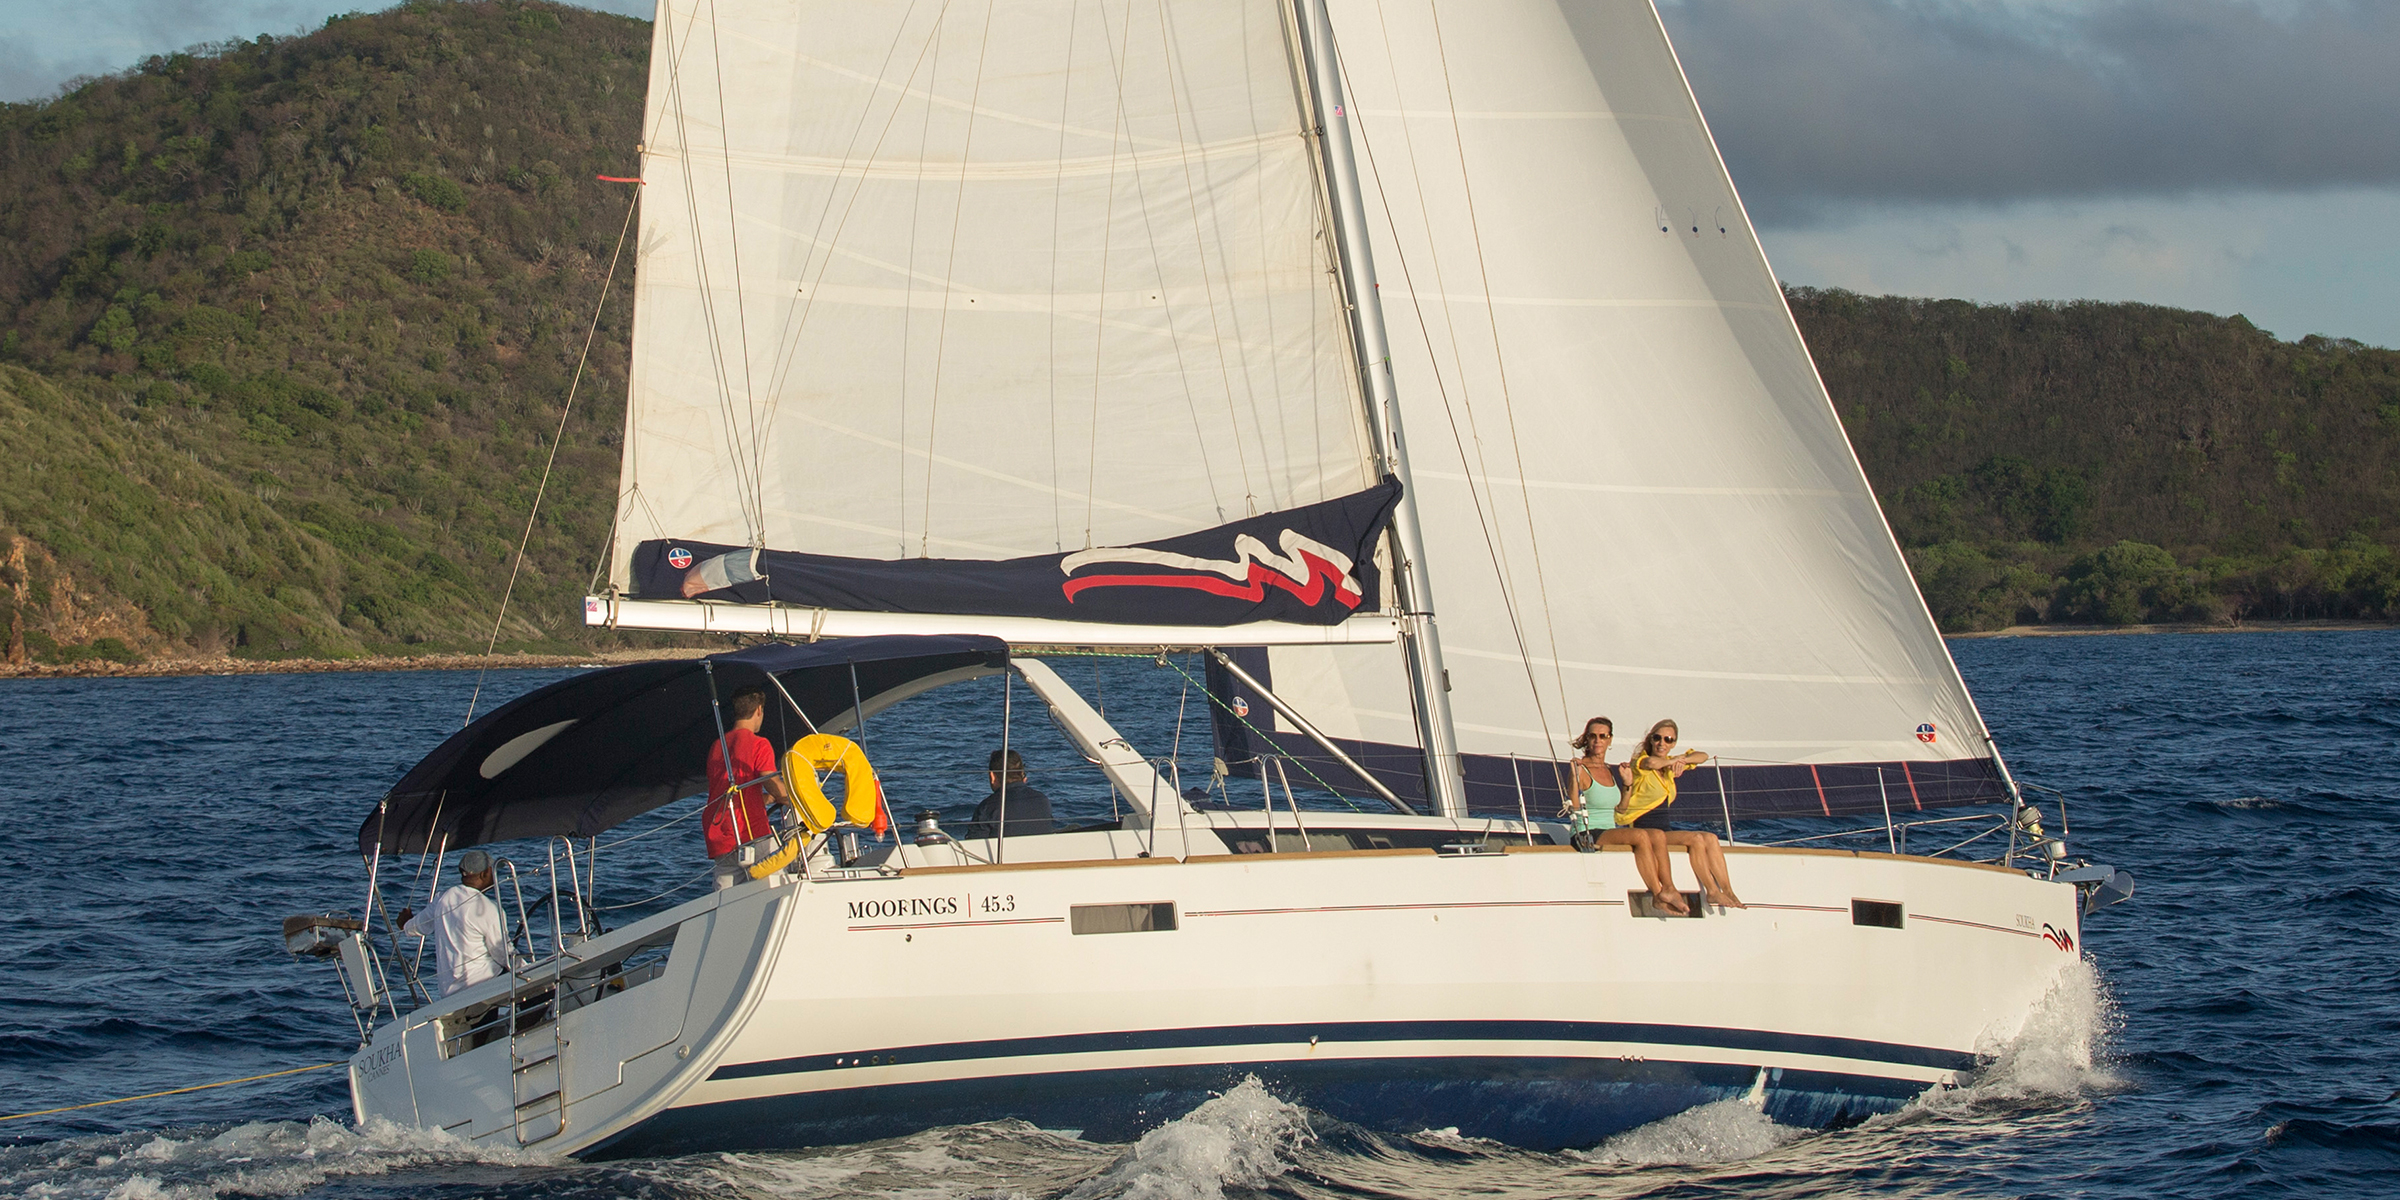 Oceanis 45 - Sailboat Charter Saint Lucia & Boat hire in St. Lucia Gros Islet Rodney Bay Marina 5